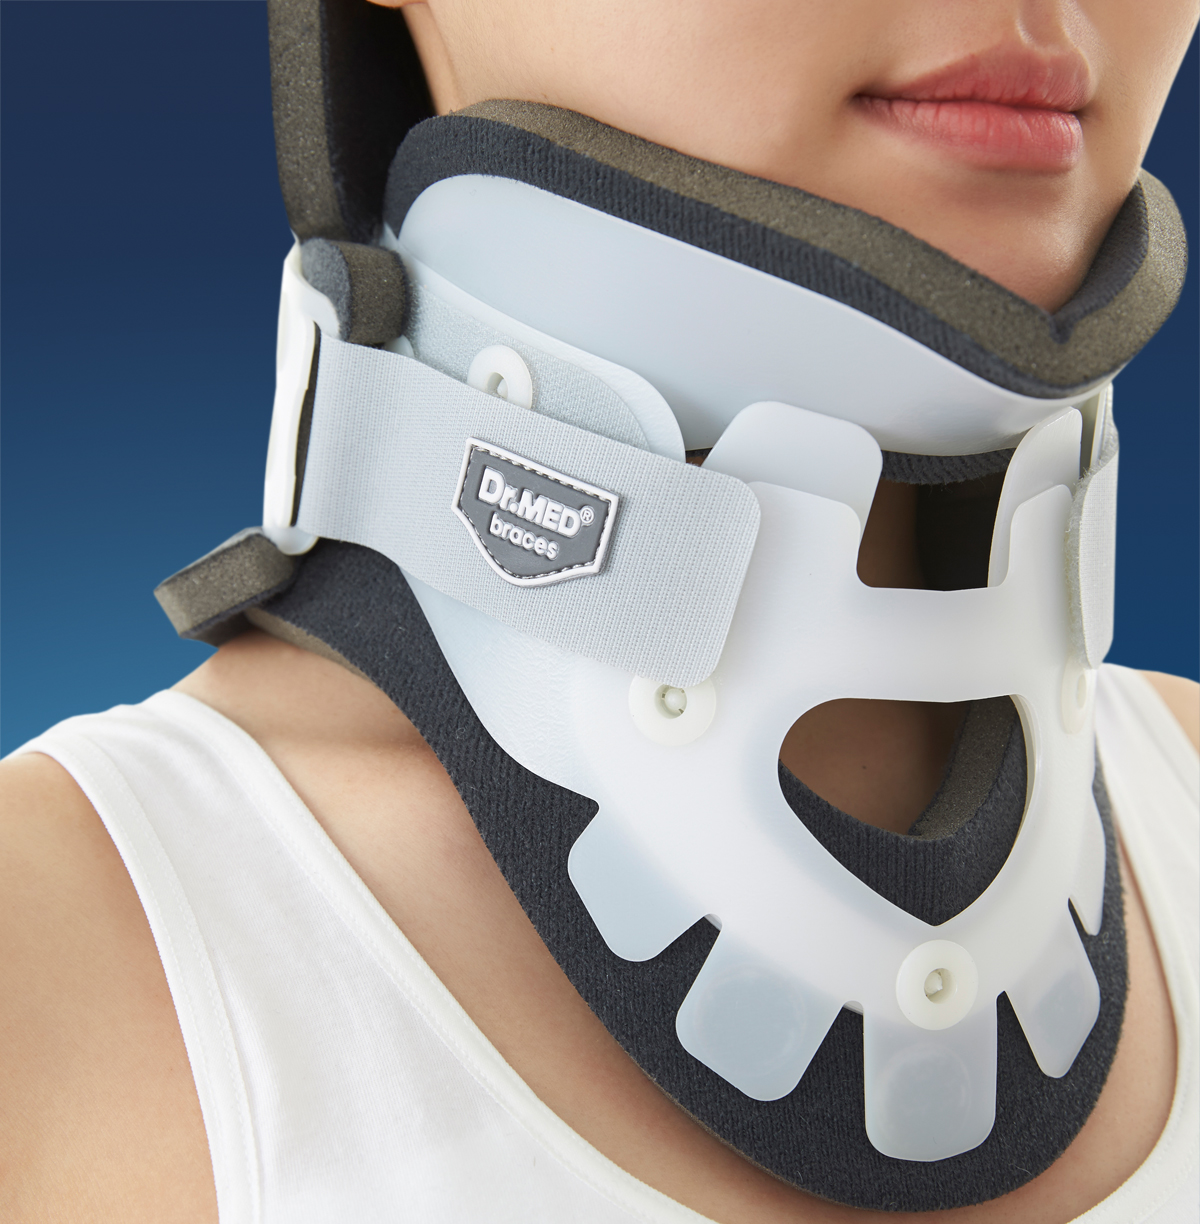 Stable cervical collar